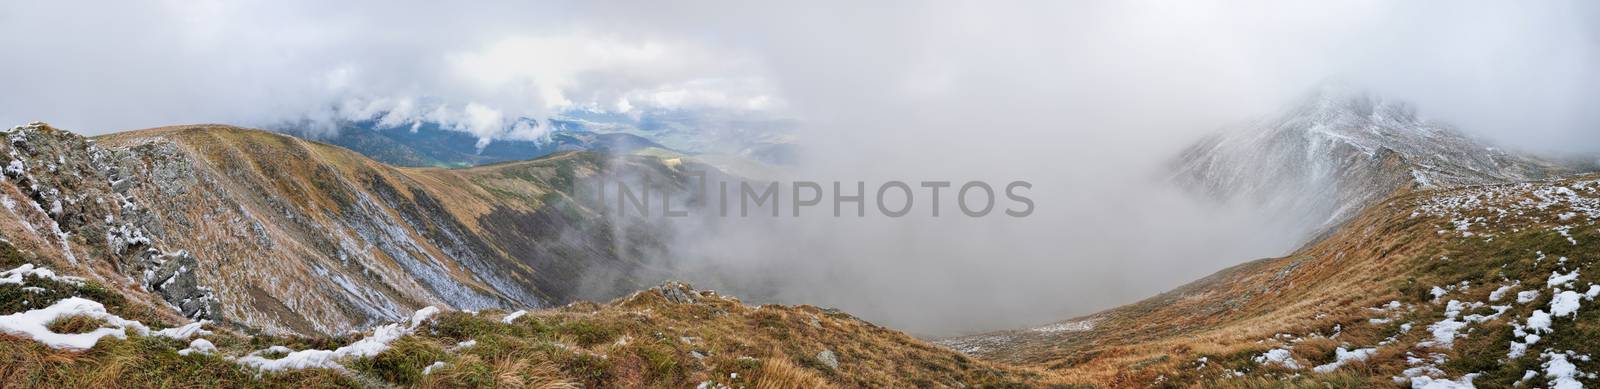 Scenic panorama from the top of Ukraine's highest mountain, Hoverla